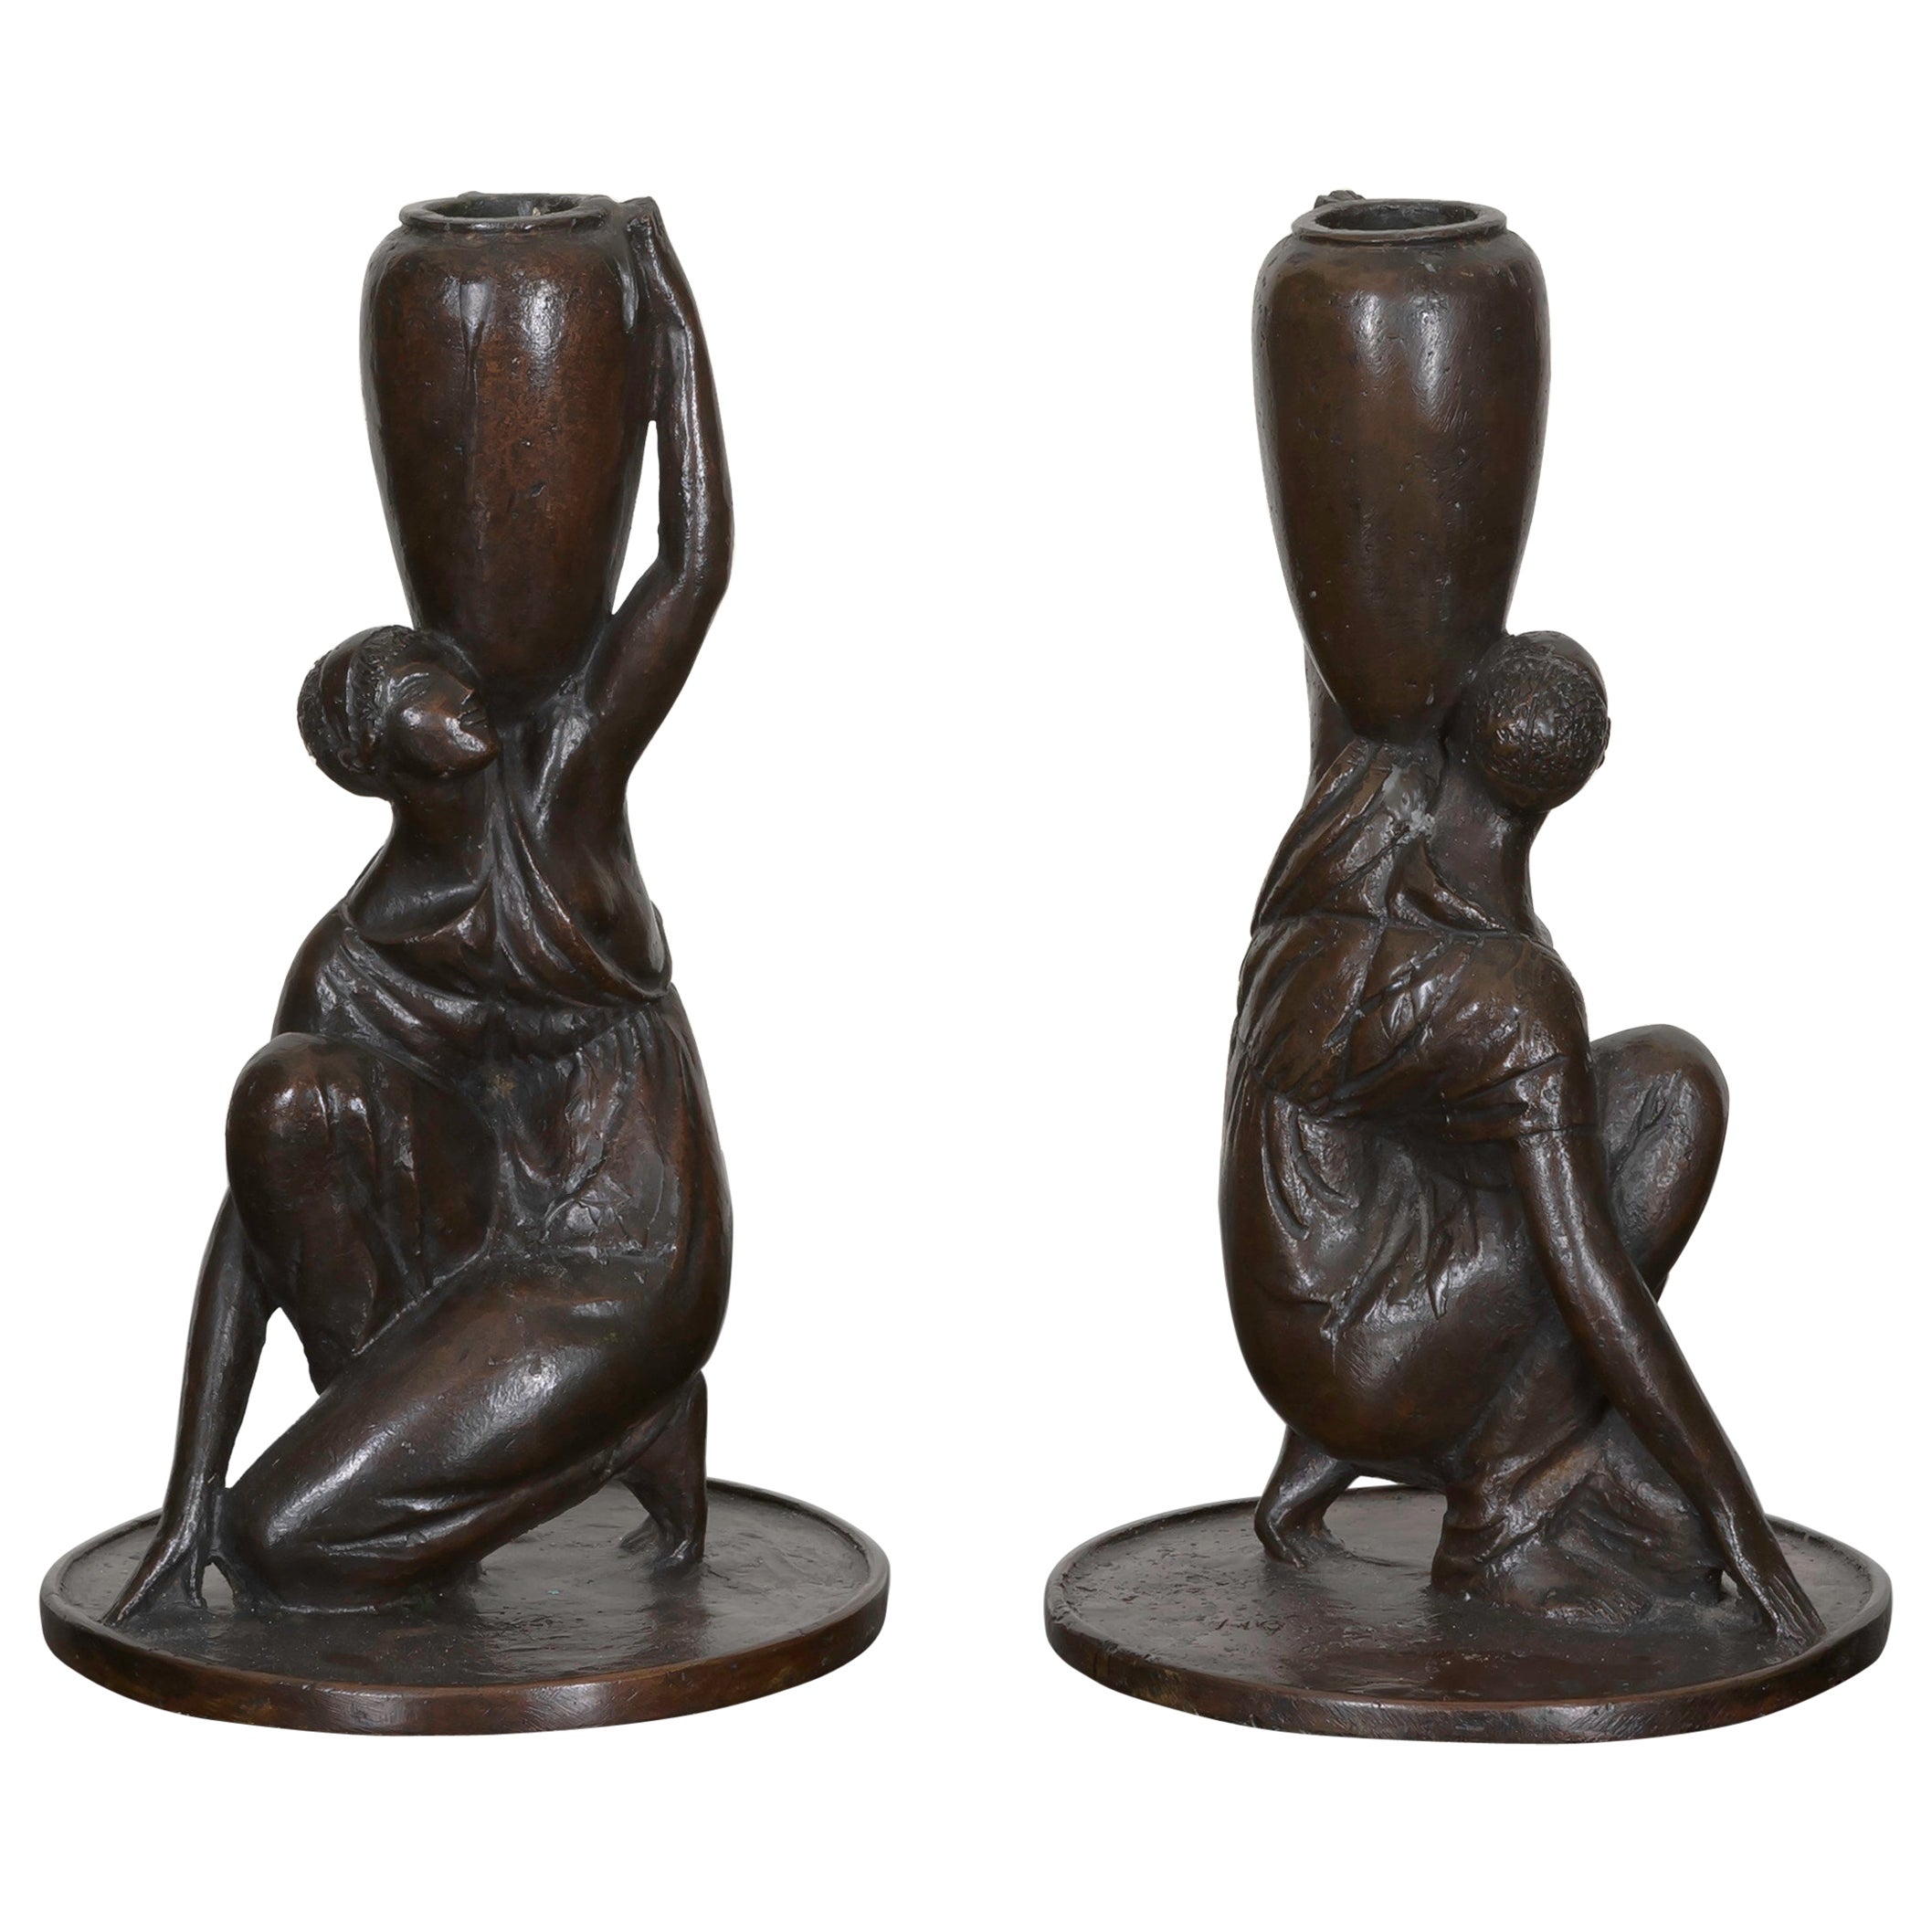 Two Sculptural Bronze Candlesticks by Cecil de Blaquiere Howard, Dated 1919